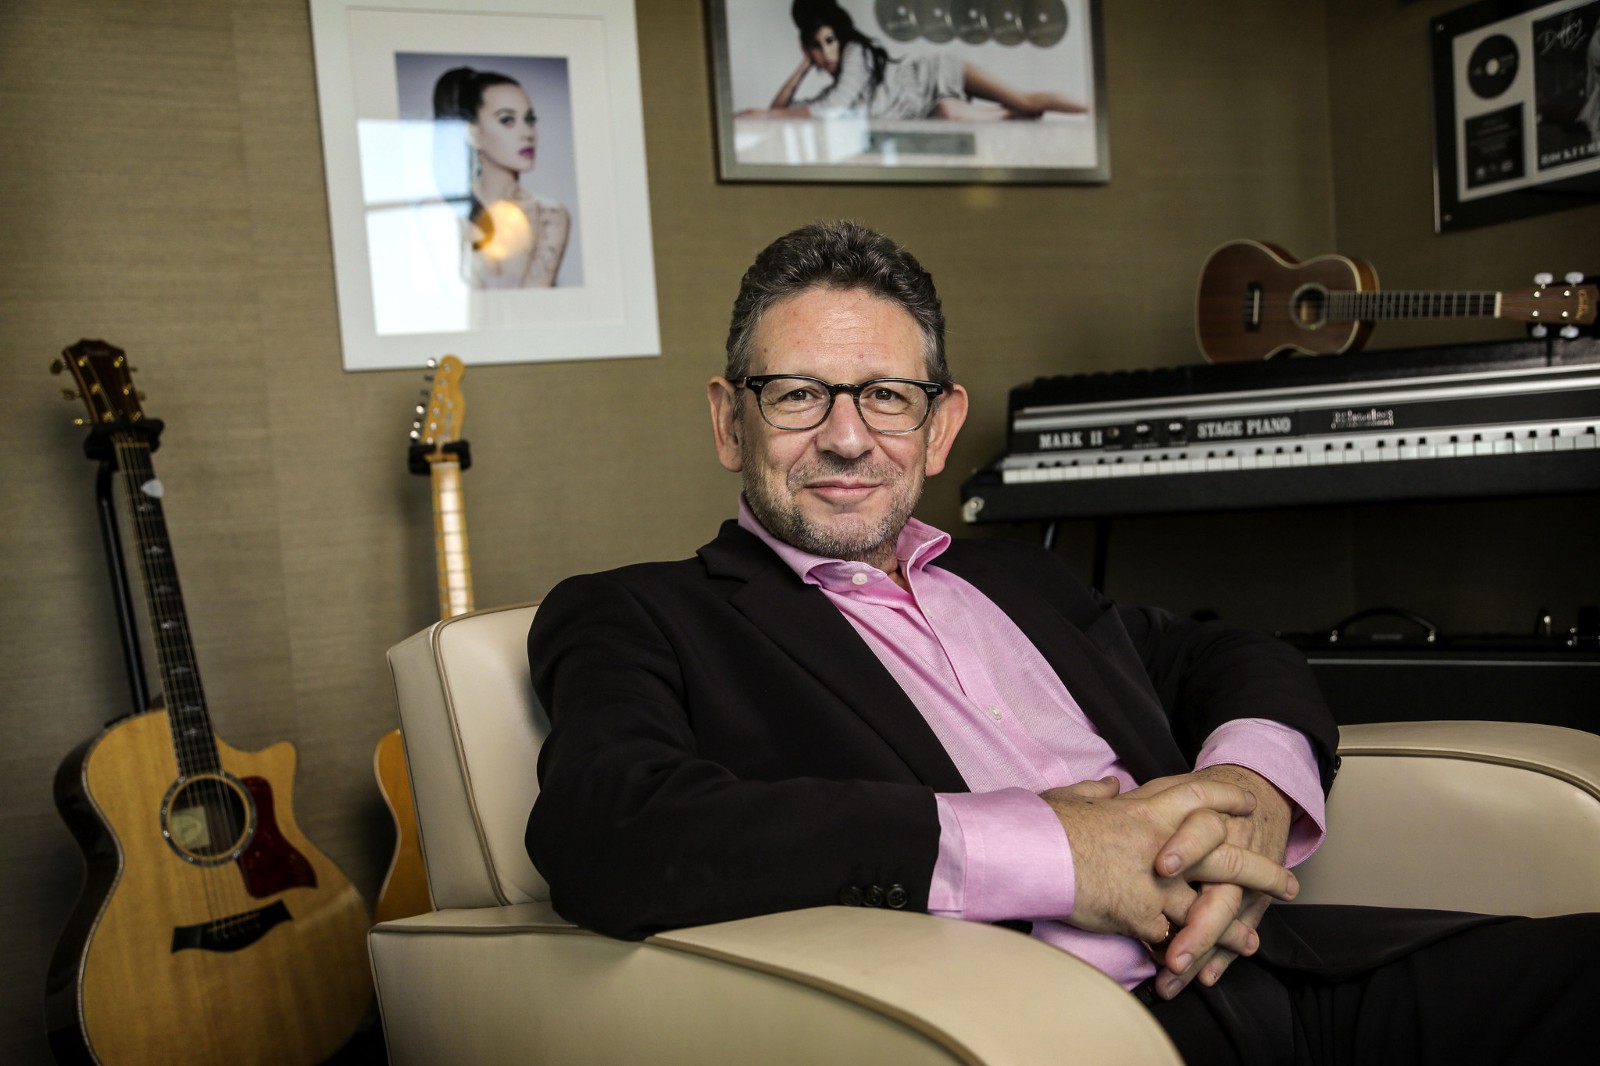 UMG CEO Lucian Grainge shares advice for artists in the age of smart speakers